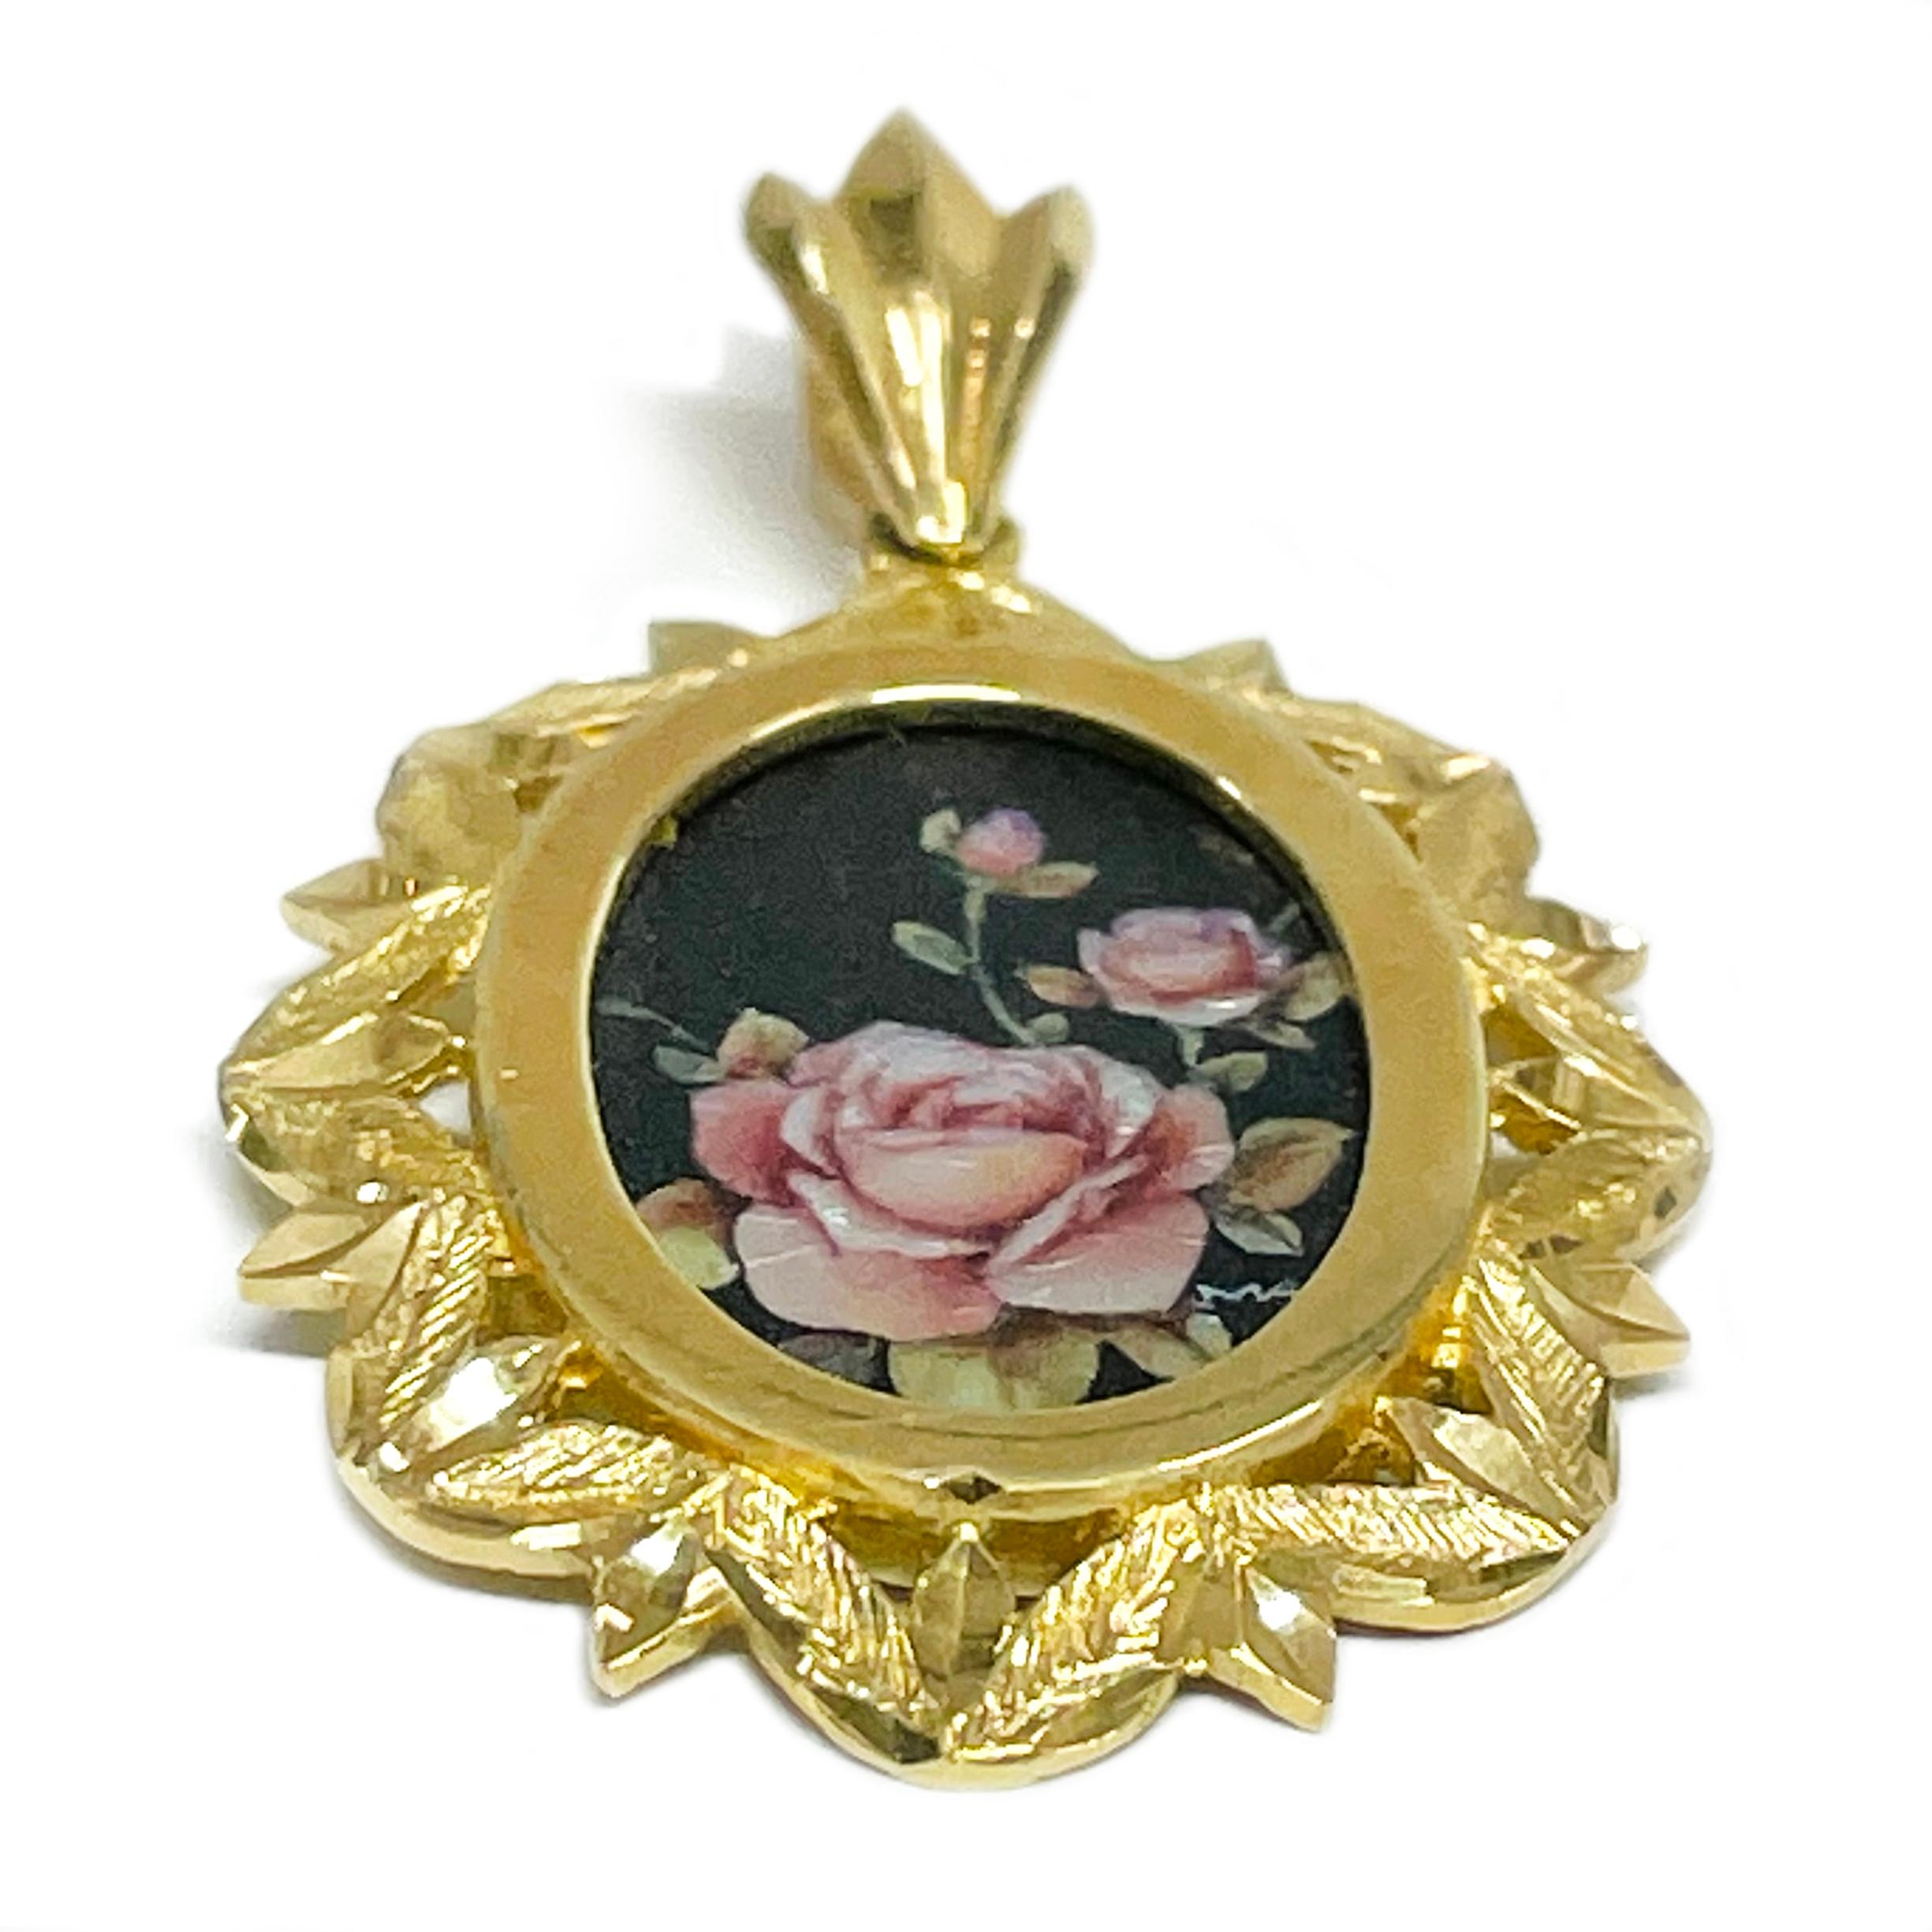 14 Karat Yellow Gold Pinks Roses on a black background Hand Painted on a Mother of Pearl Pendant. The miniature painting is set in a 14 karat gold ornate oval frame with diamond-cut details. The painting is signed by the master artist, CR Charlotte